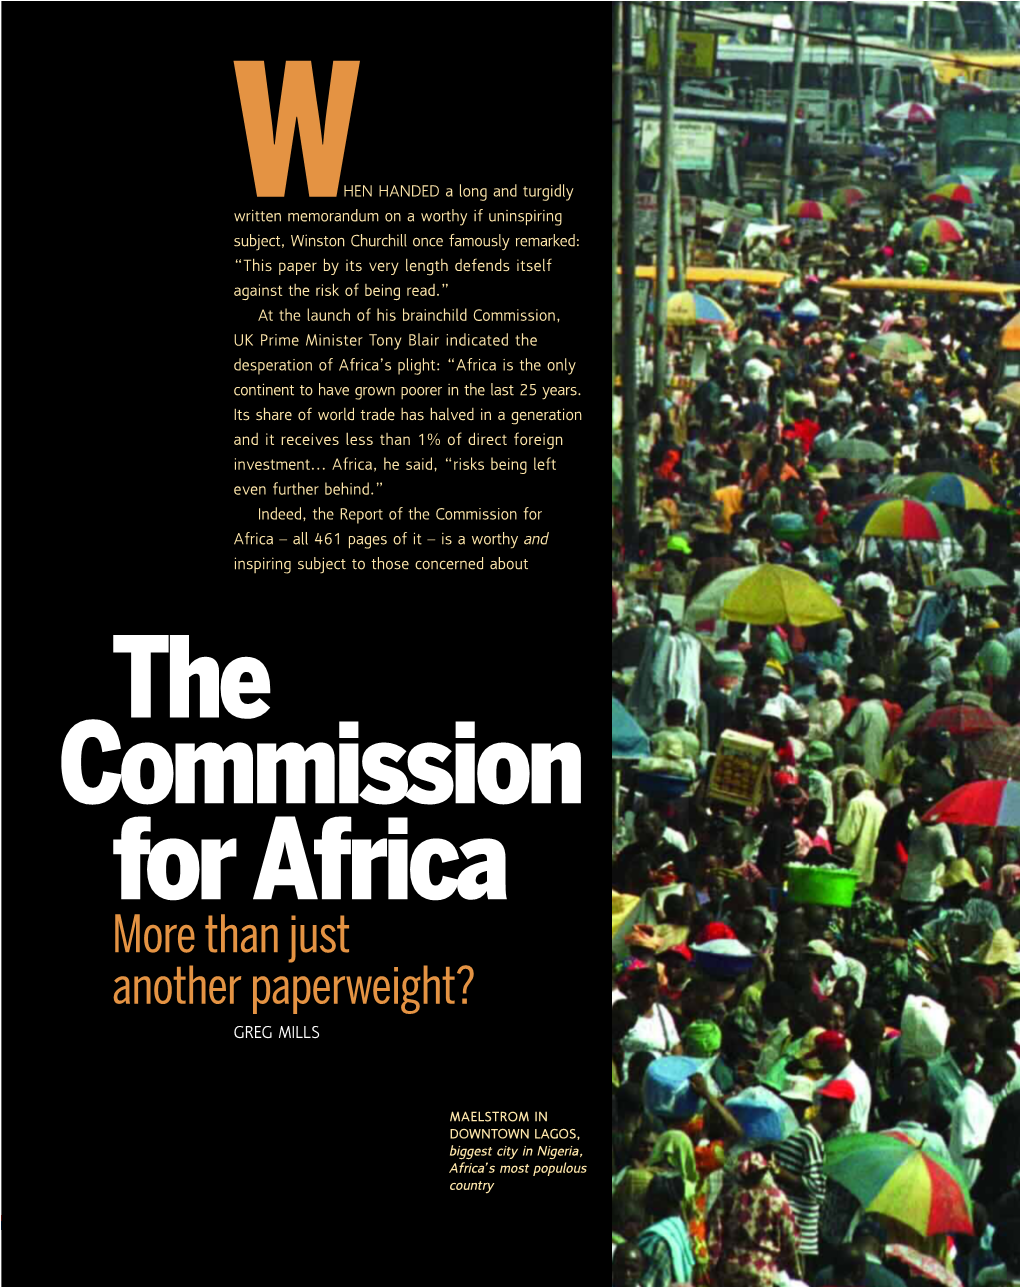 The Commission for Africa